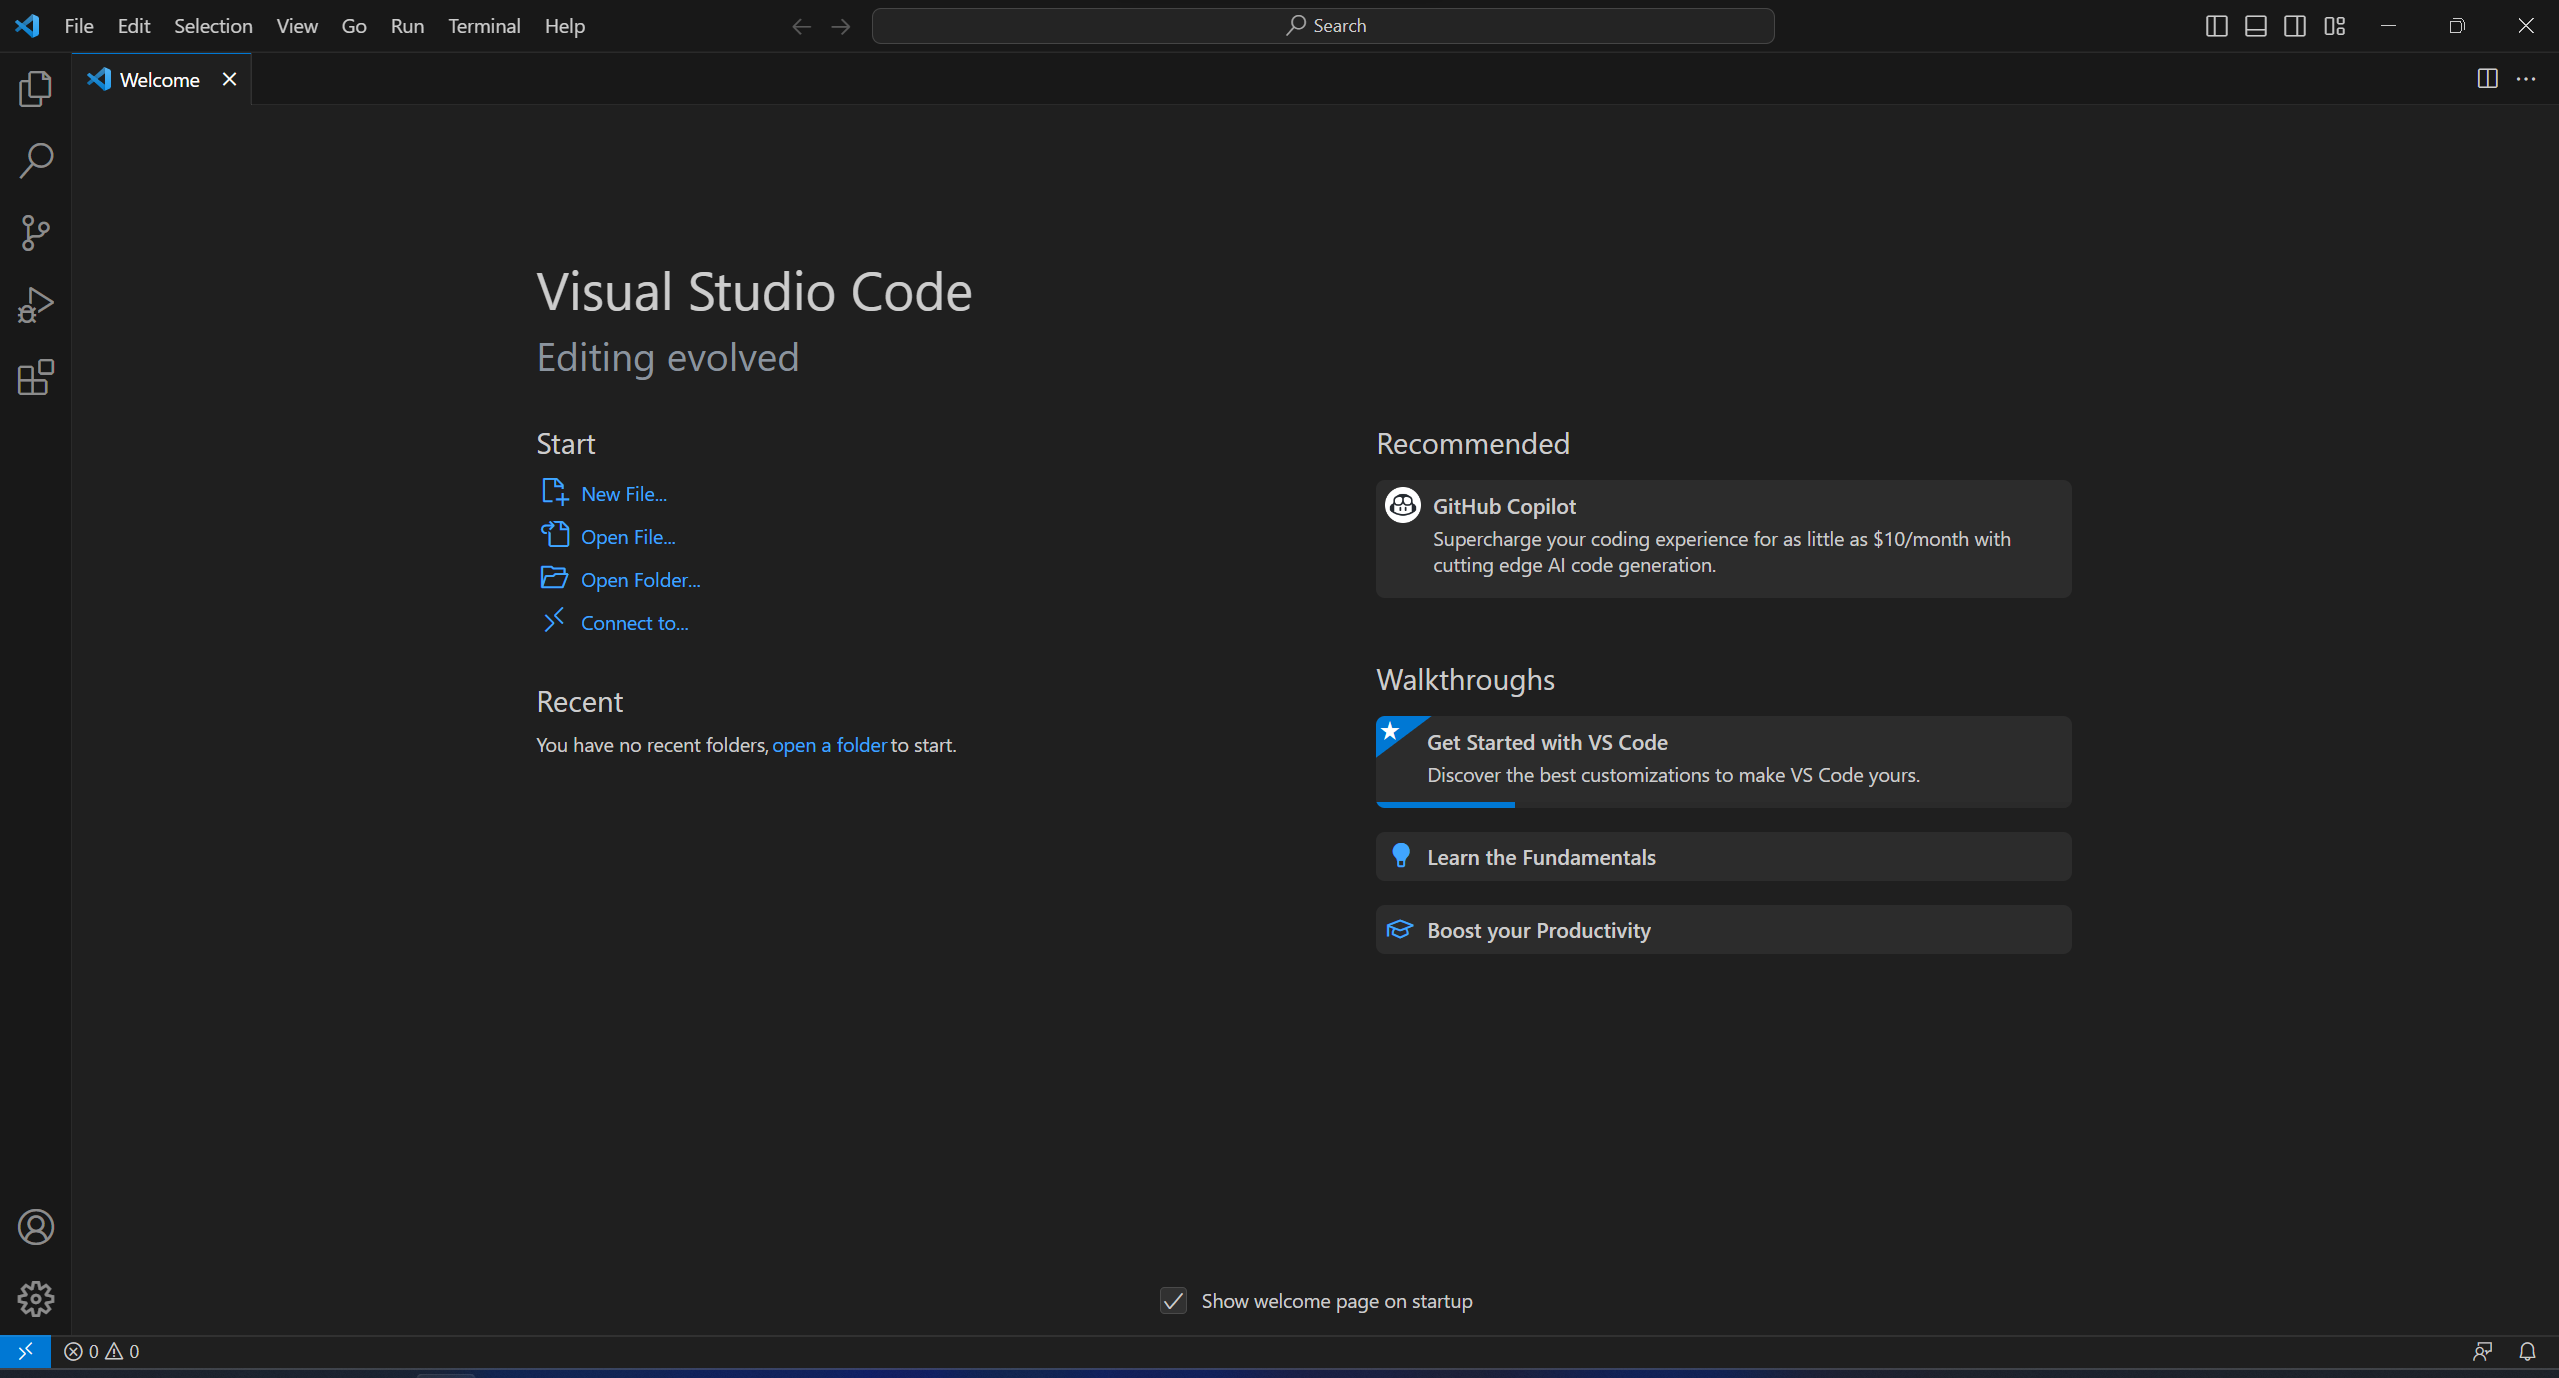 VS Code welcome page